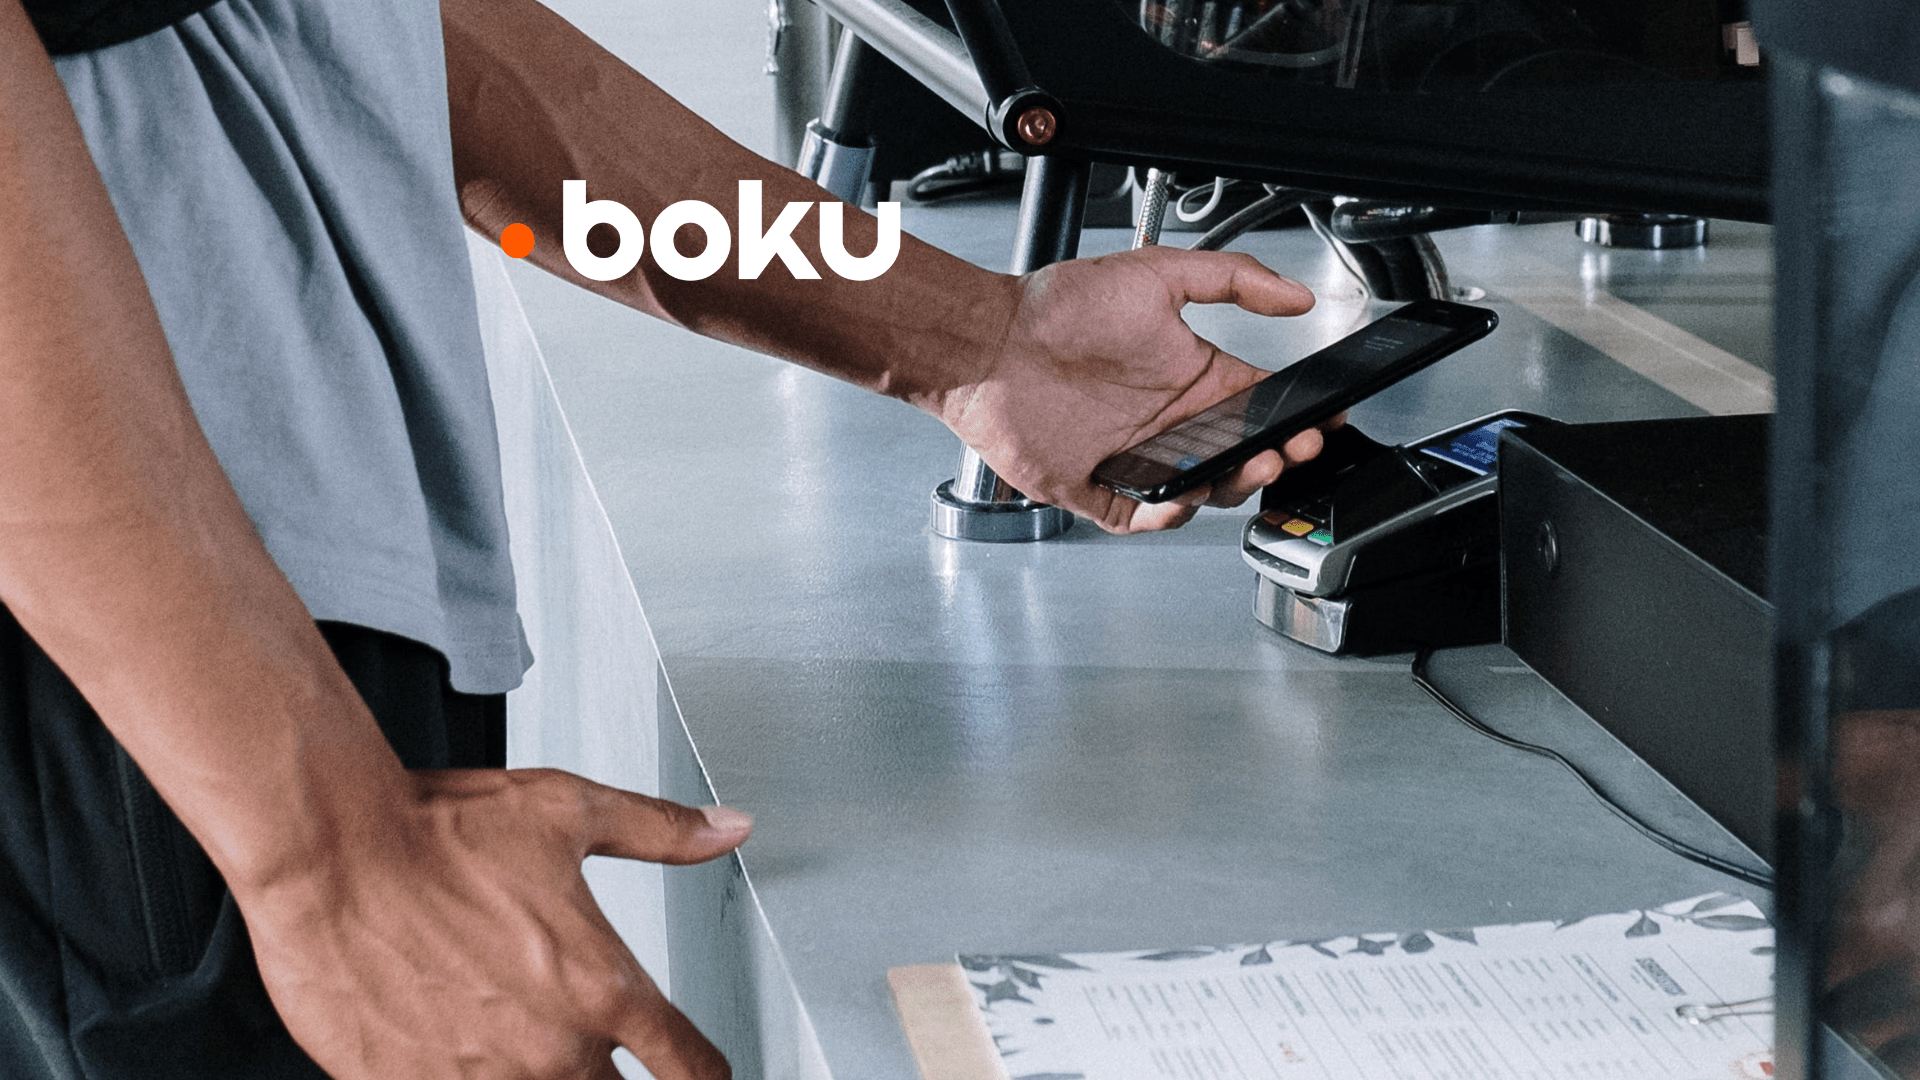 Boku’s analyst relations halves the major competitor’s lead